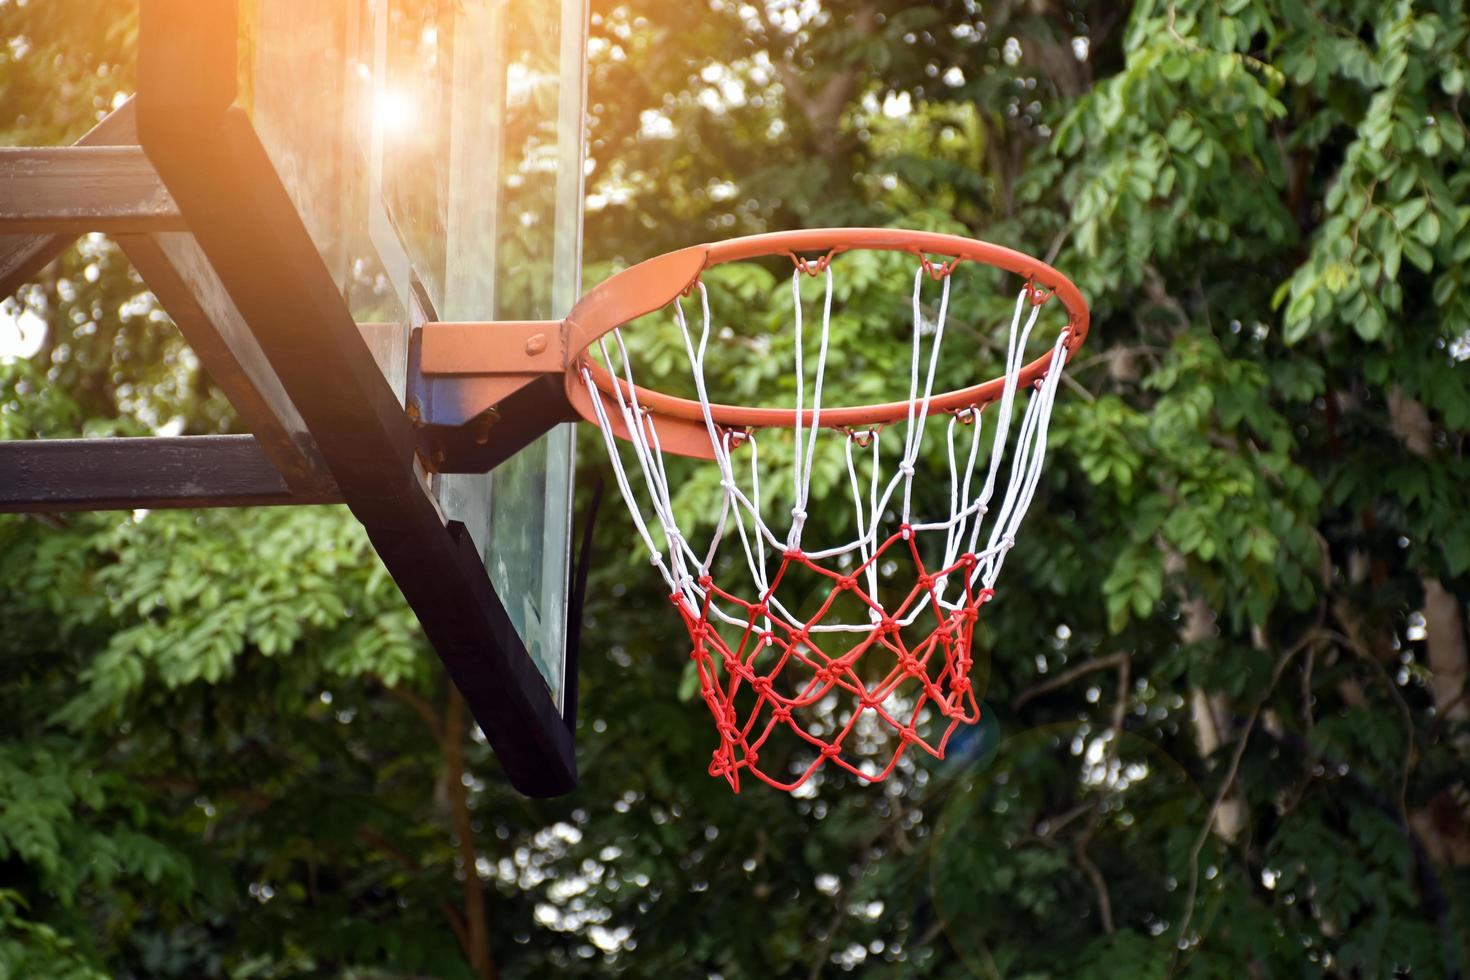 Basketball hoop on outdoor shooting target, blurred and sunlight edited background. Soft and selective focus on basketball hoop. photo